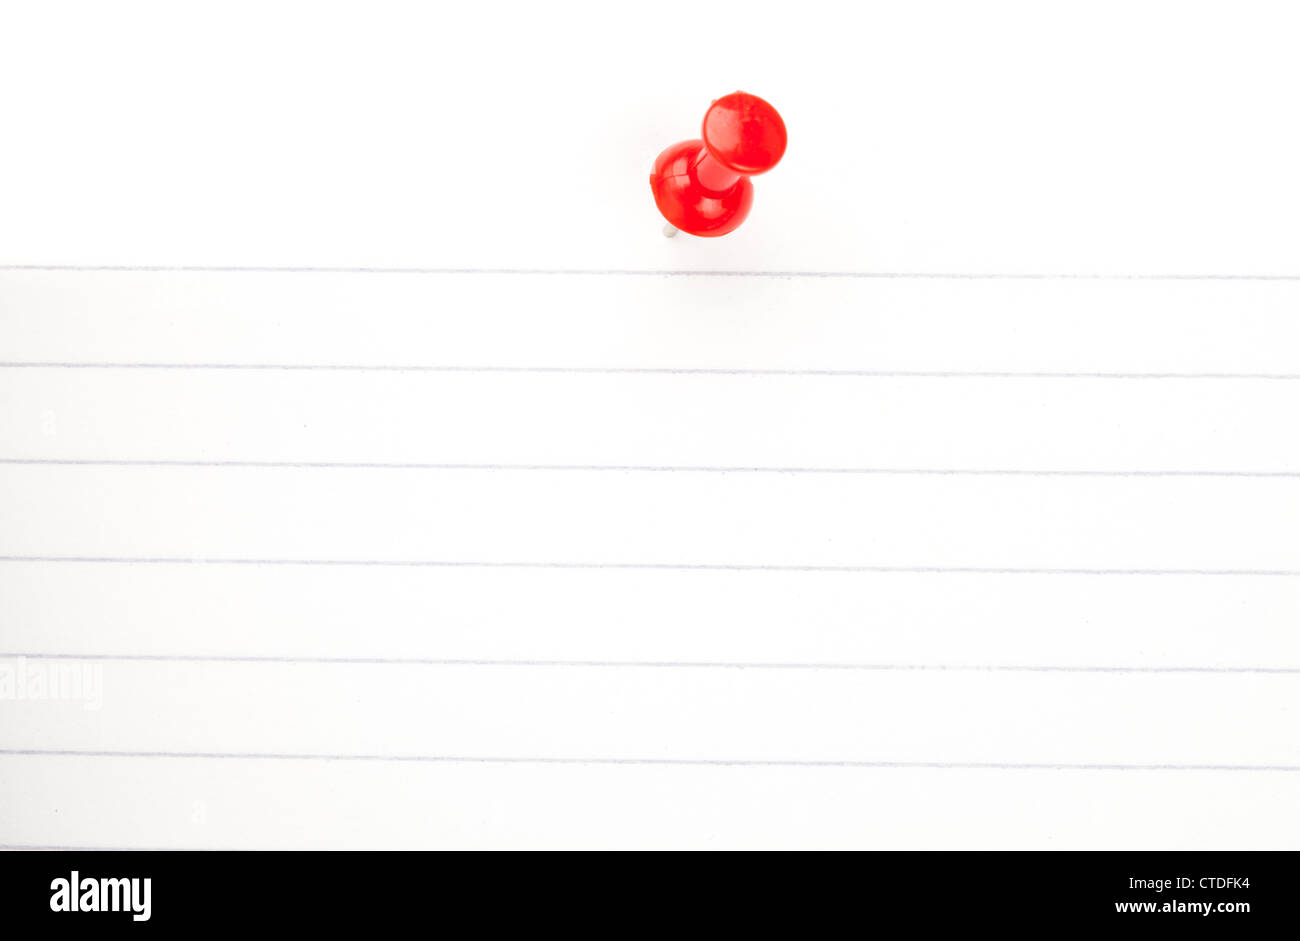 Red pushpin with a white paper Stock Photo